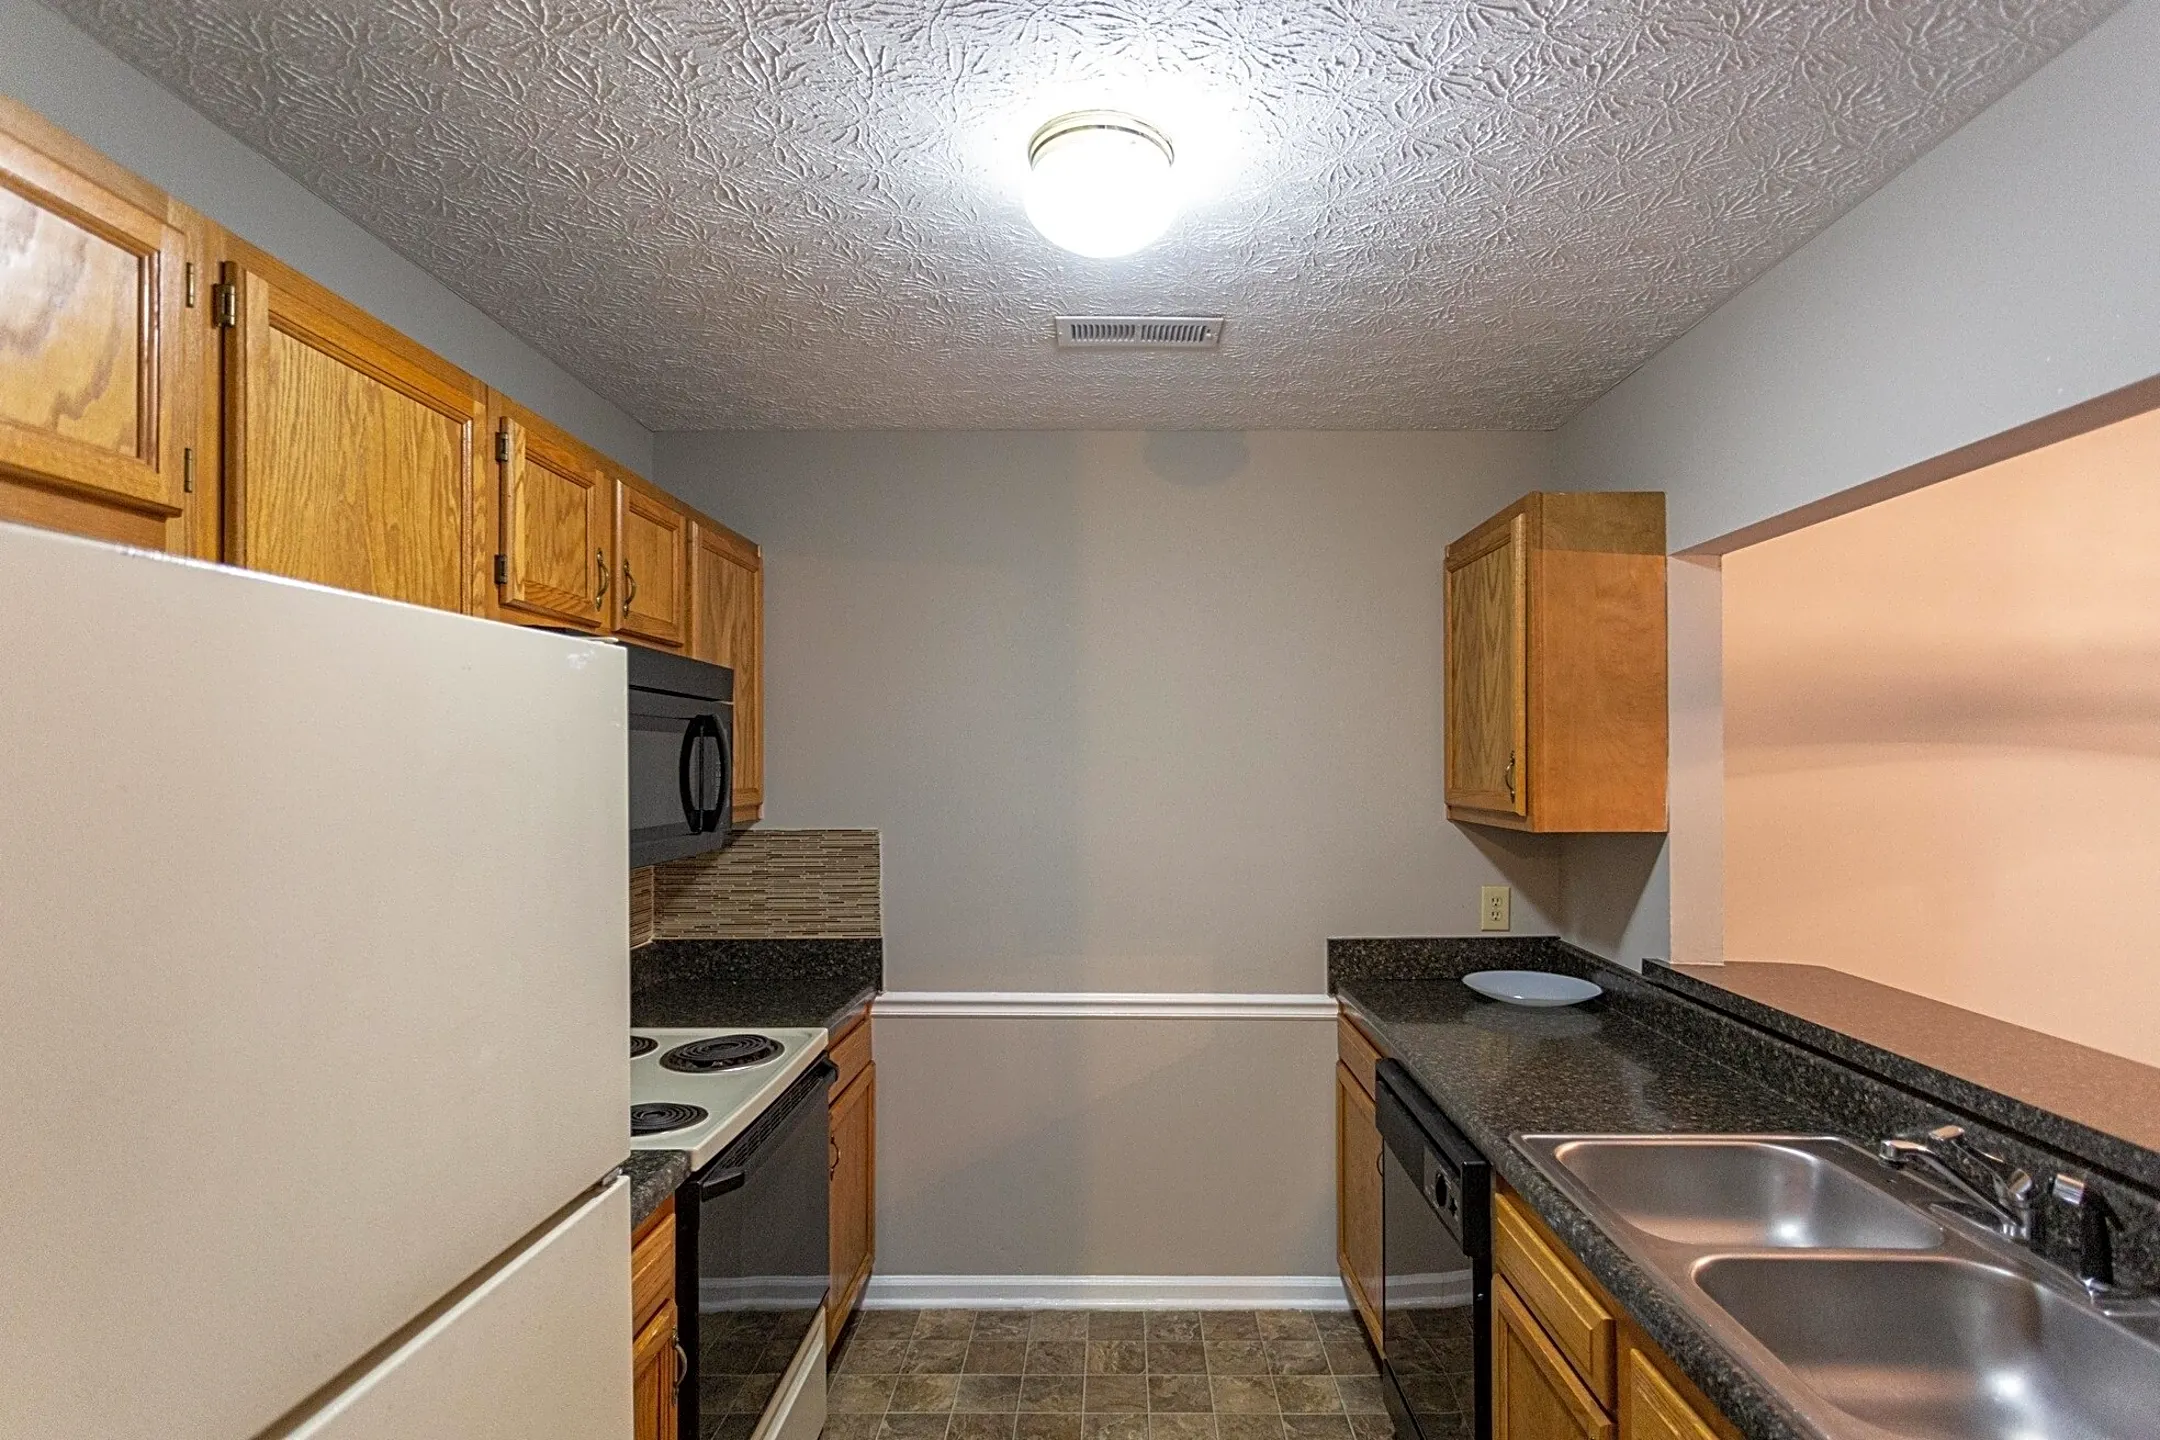 Kitchen - Cave Springs Apartments - Bowling Green, KY